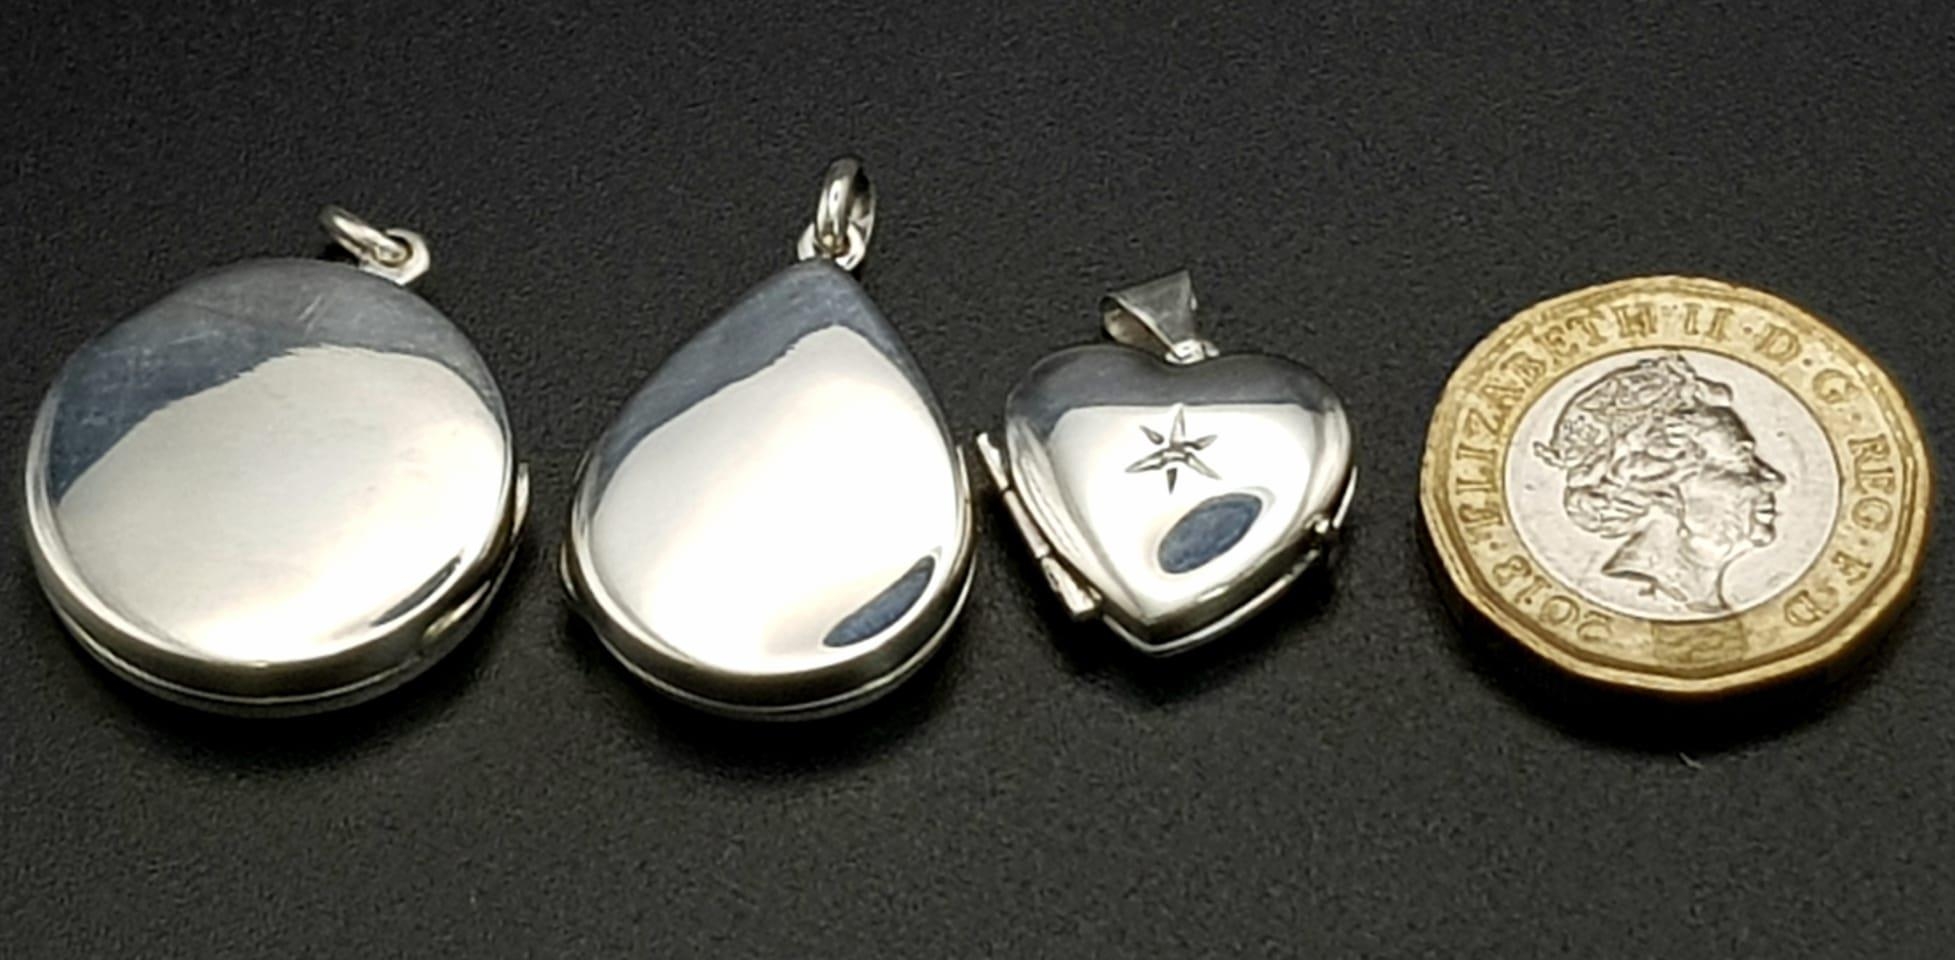 3 X STERLING SILVER LOCKETS 11.2G - Image 3 of 3